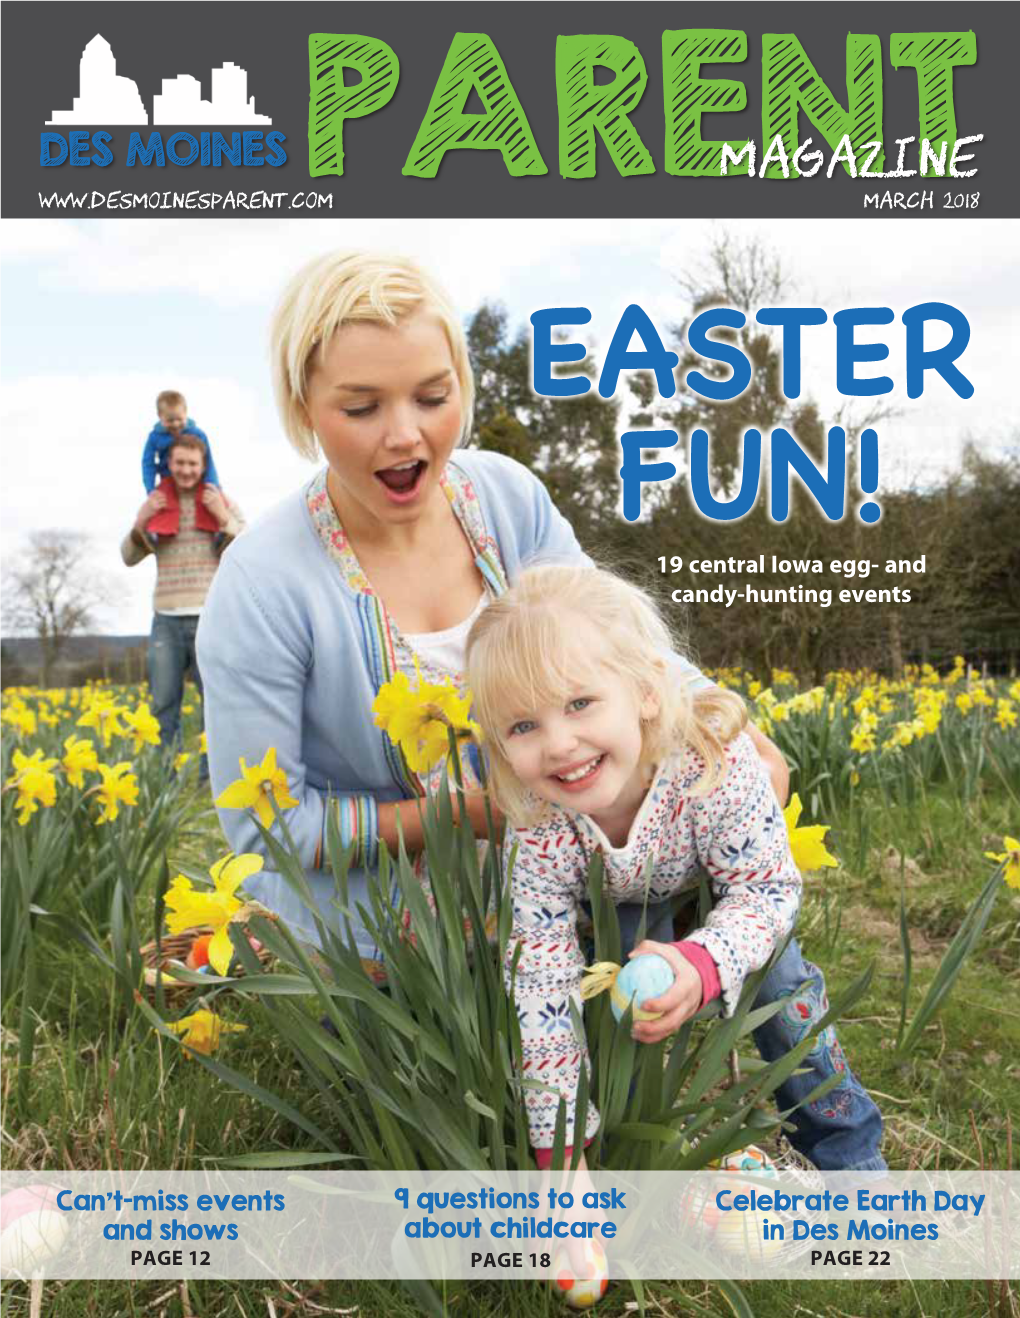 MAGAZINE MARCH 2018 EASTER FUN! 19 Central Iowa Egg- and Candy-Hunting Events